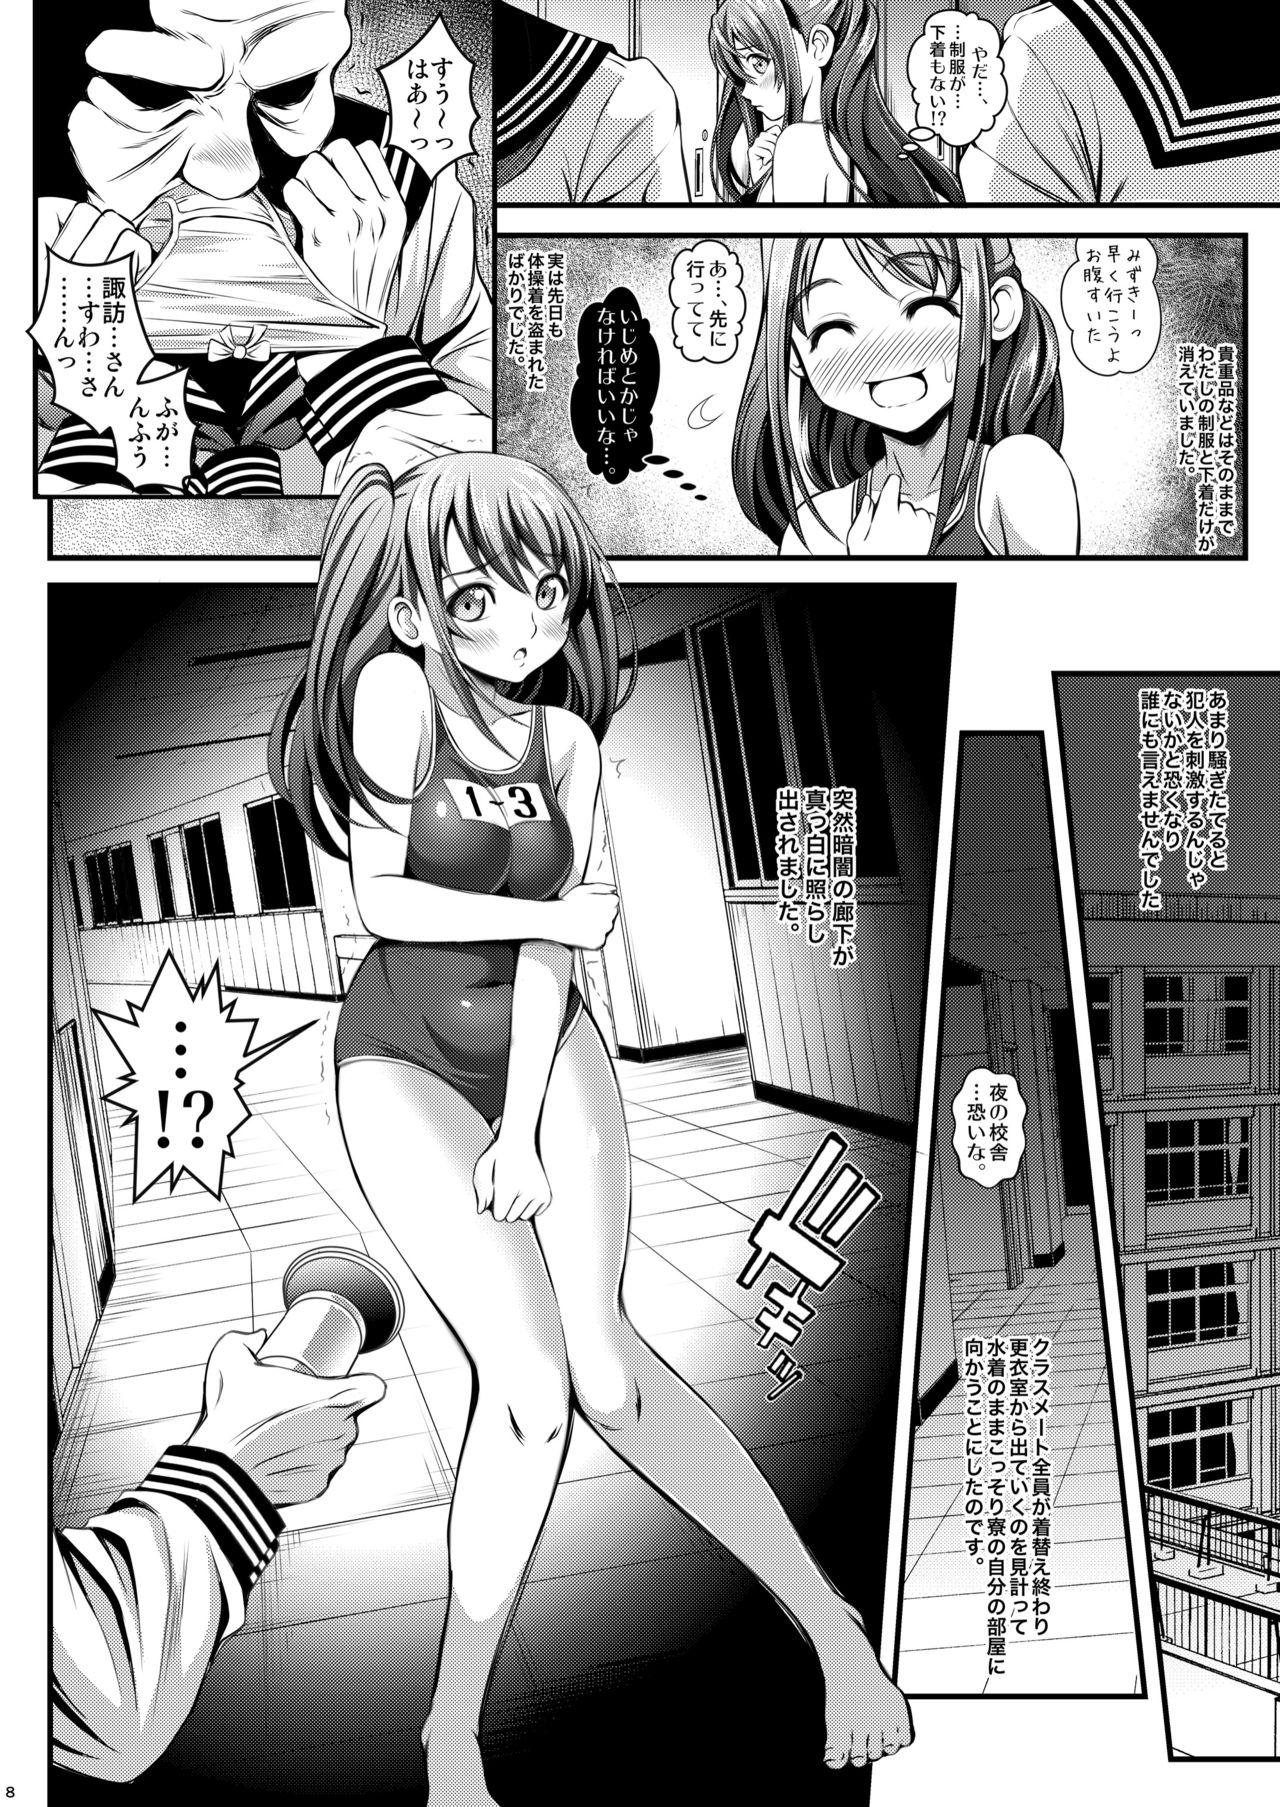 Mistress Youmuin no Ossan - Original Breasts - Page 8